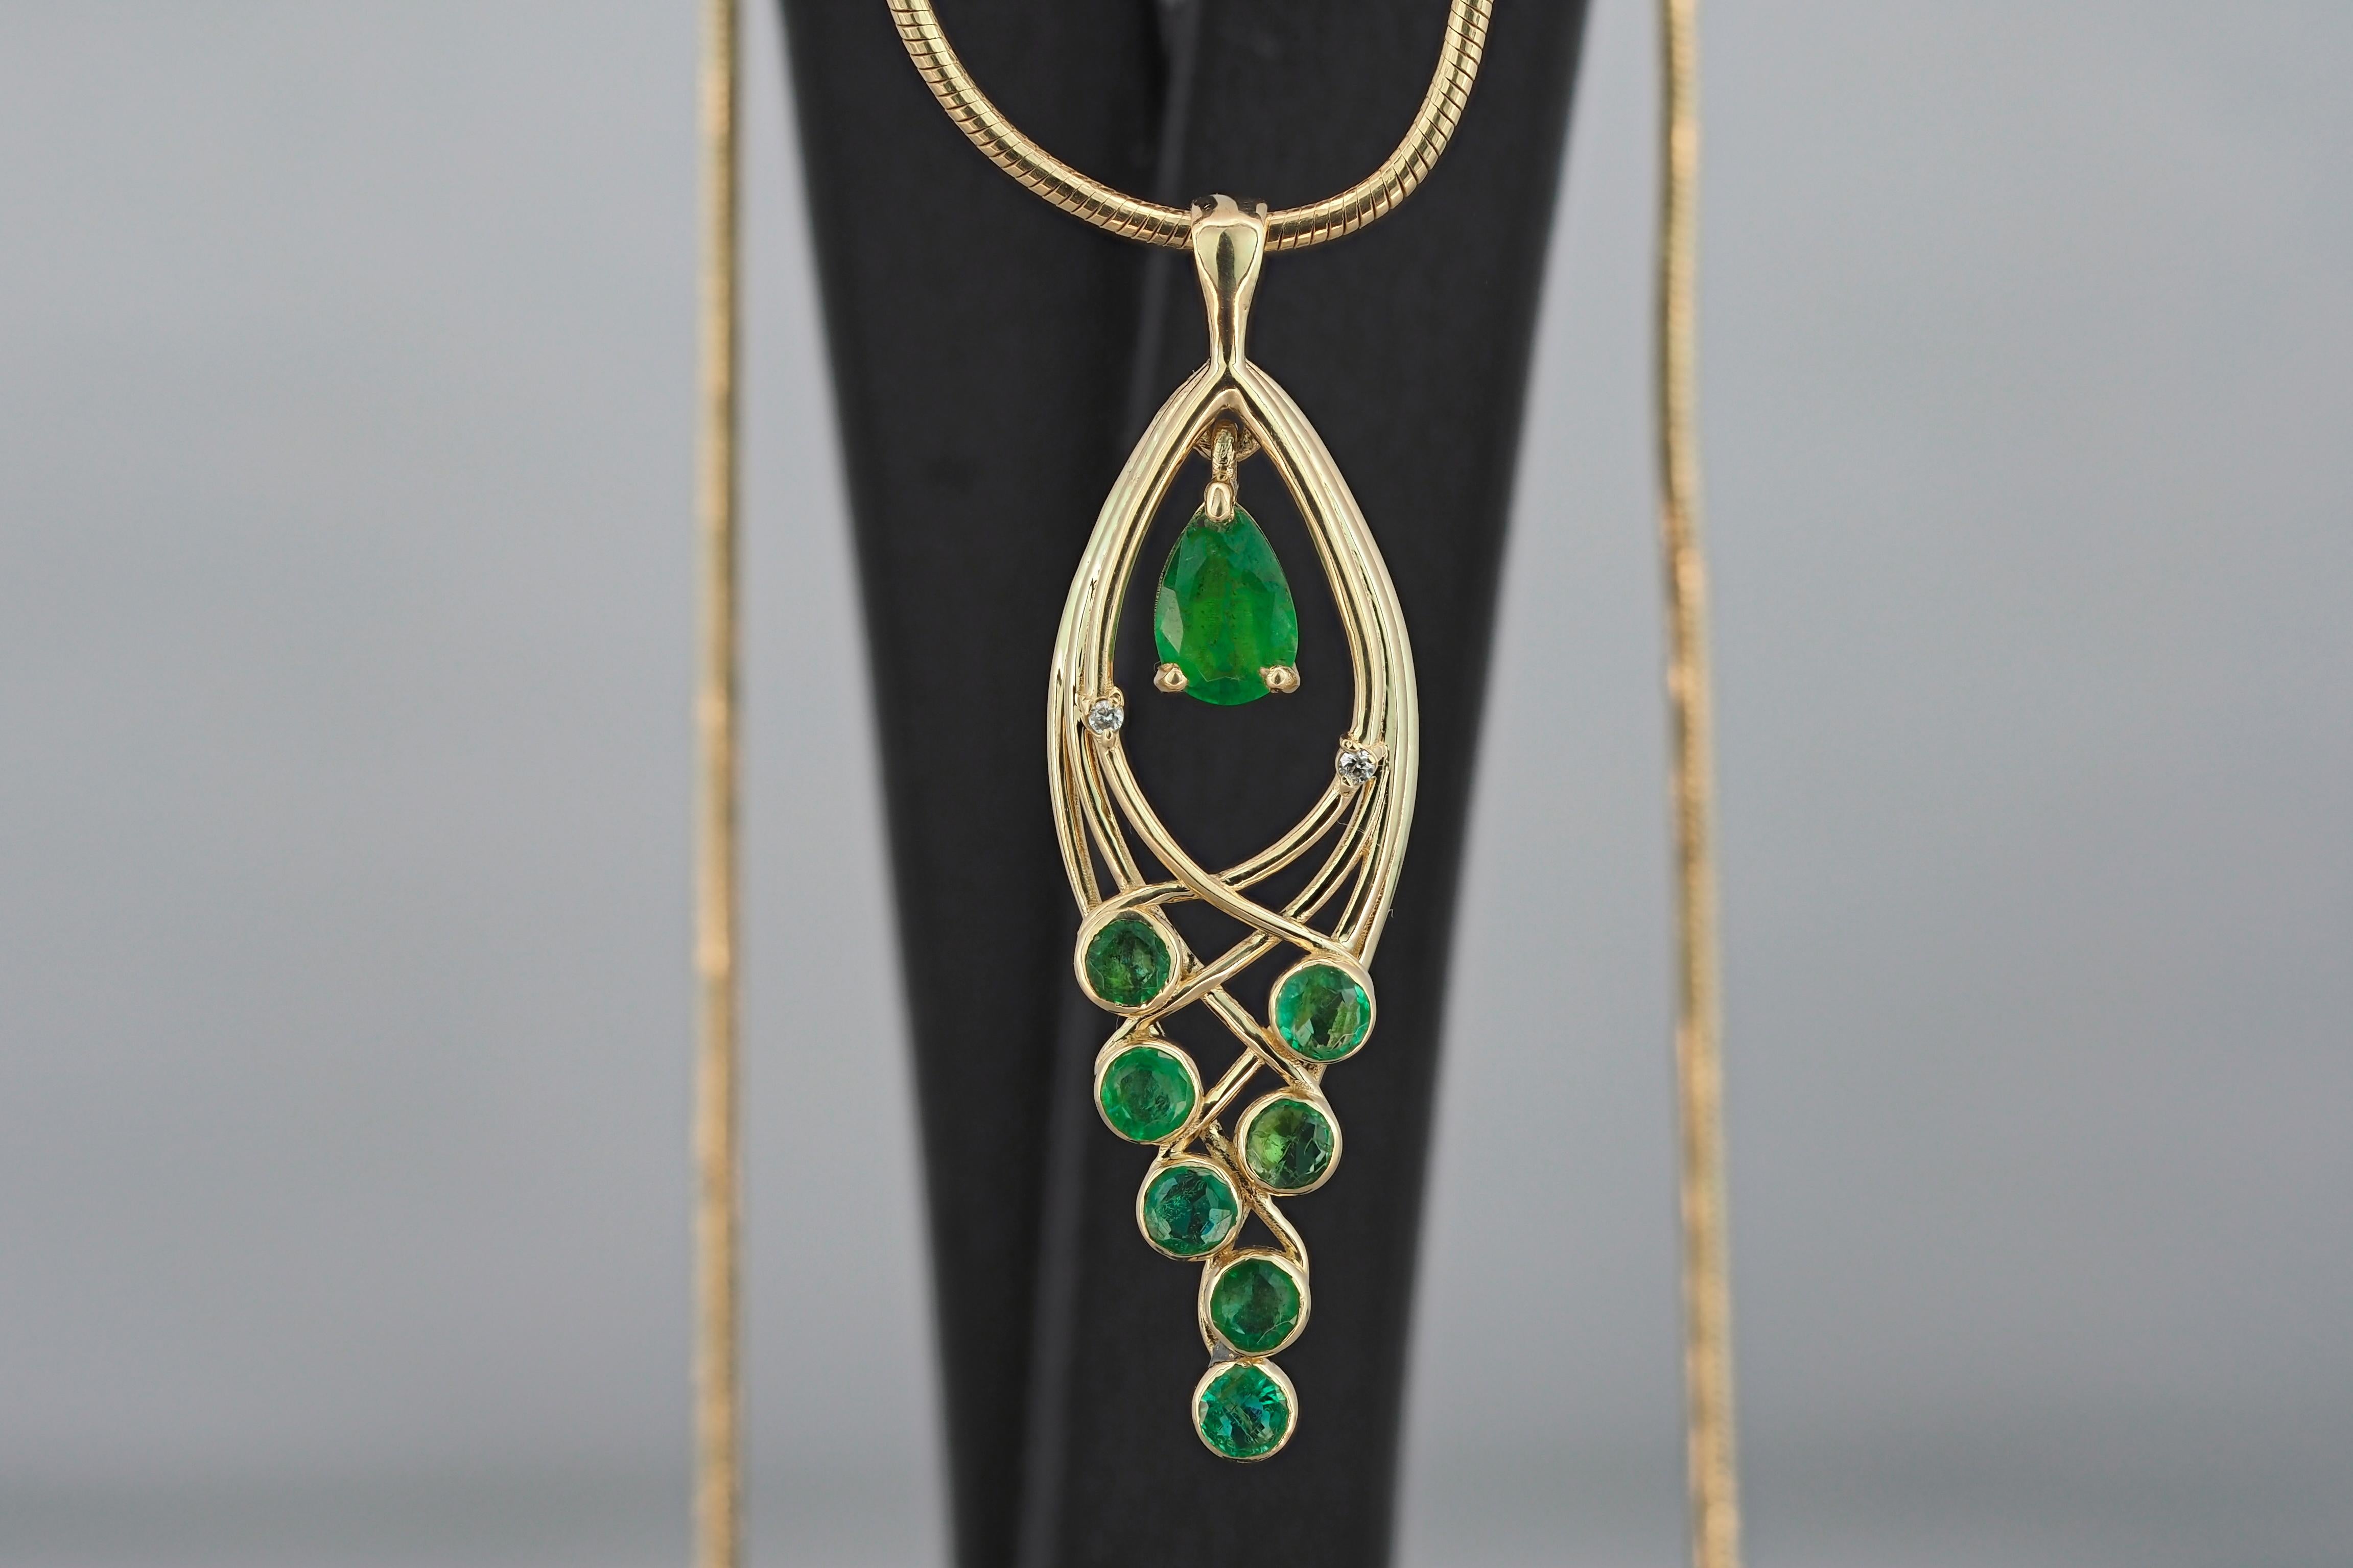 14kt solid gold pendant with natural emerald, emeralds and diamonds.
Weight: 1.4 g.
Pendant size: 35 х 10.33 mm. 
Central stone: Natural emerald
Cut: Pear
Weight: approx 0.70 ct.
Color: Green
Clarity: Transparent with inclusions (See in